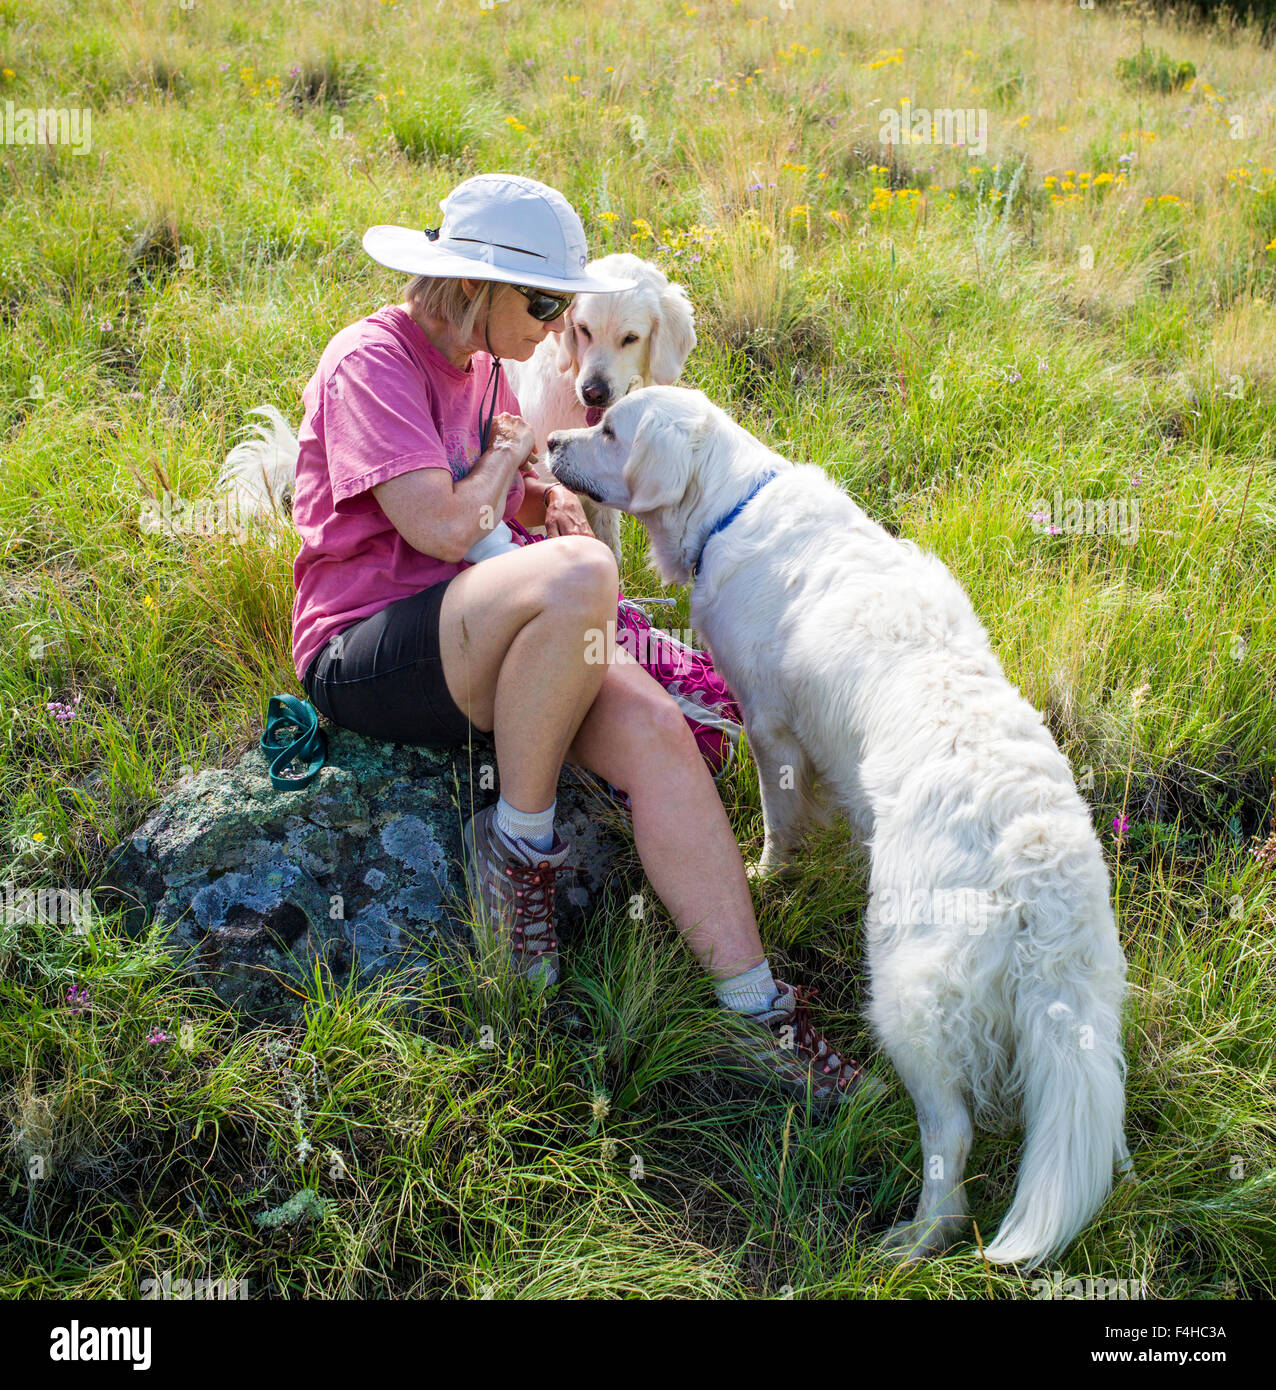 Female hiker pauses to feed two platinum colored Golden Retriever dogs Stock Photo